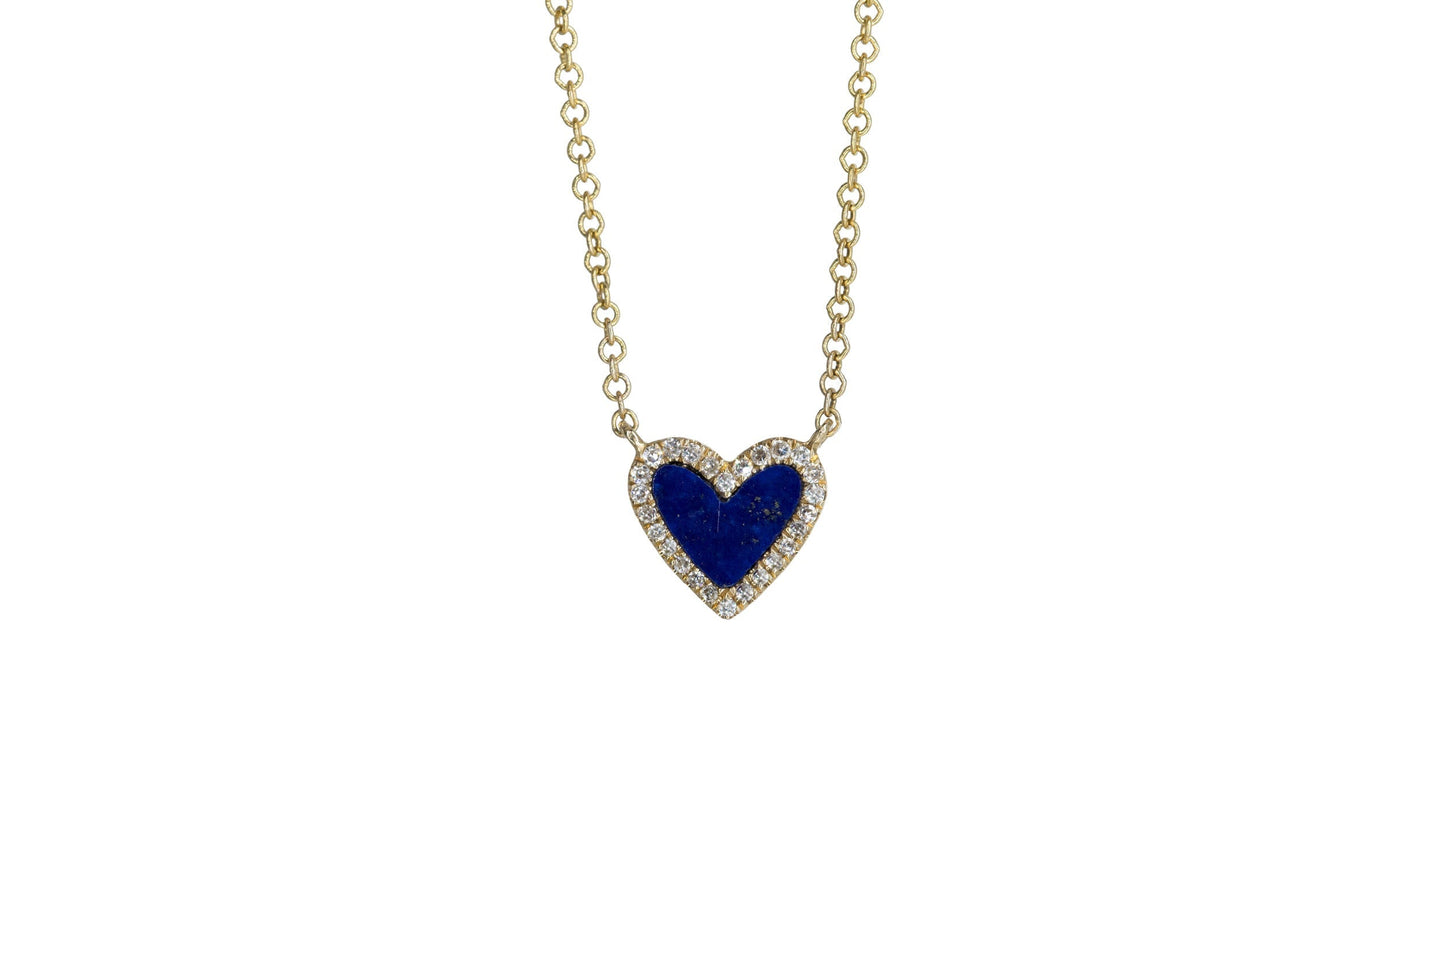 14KT Yellow Gold Diamond Pave and Lapis Mini Heart Necklace